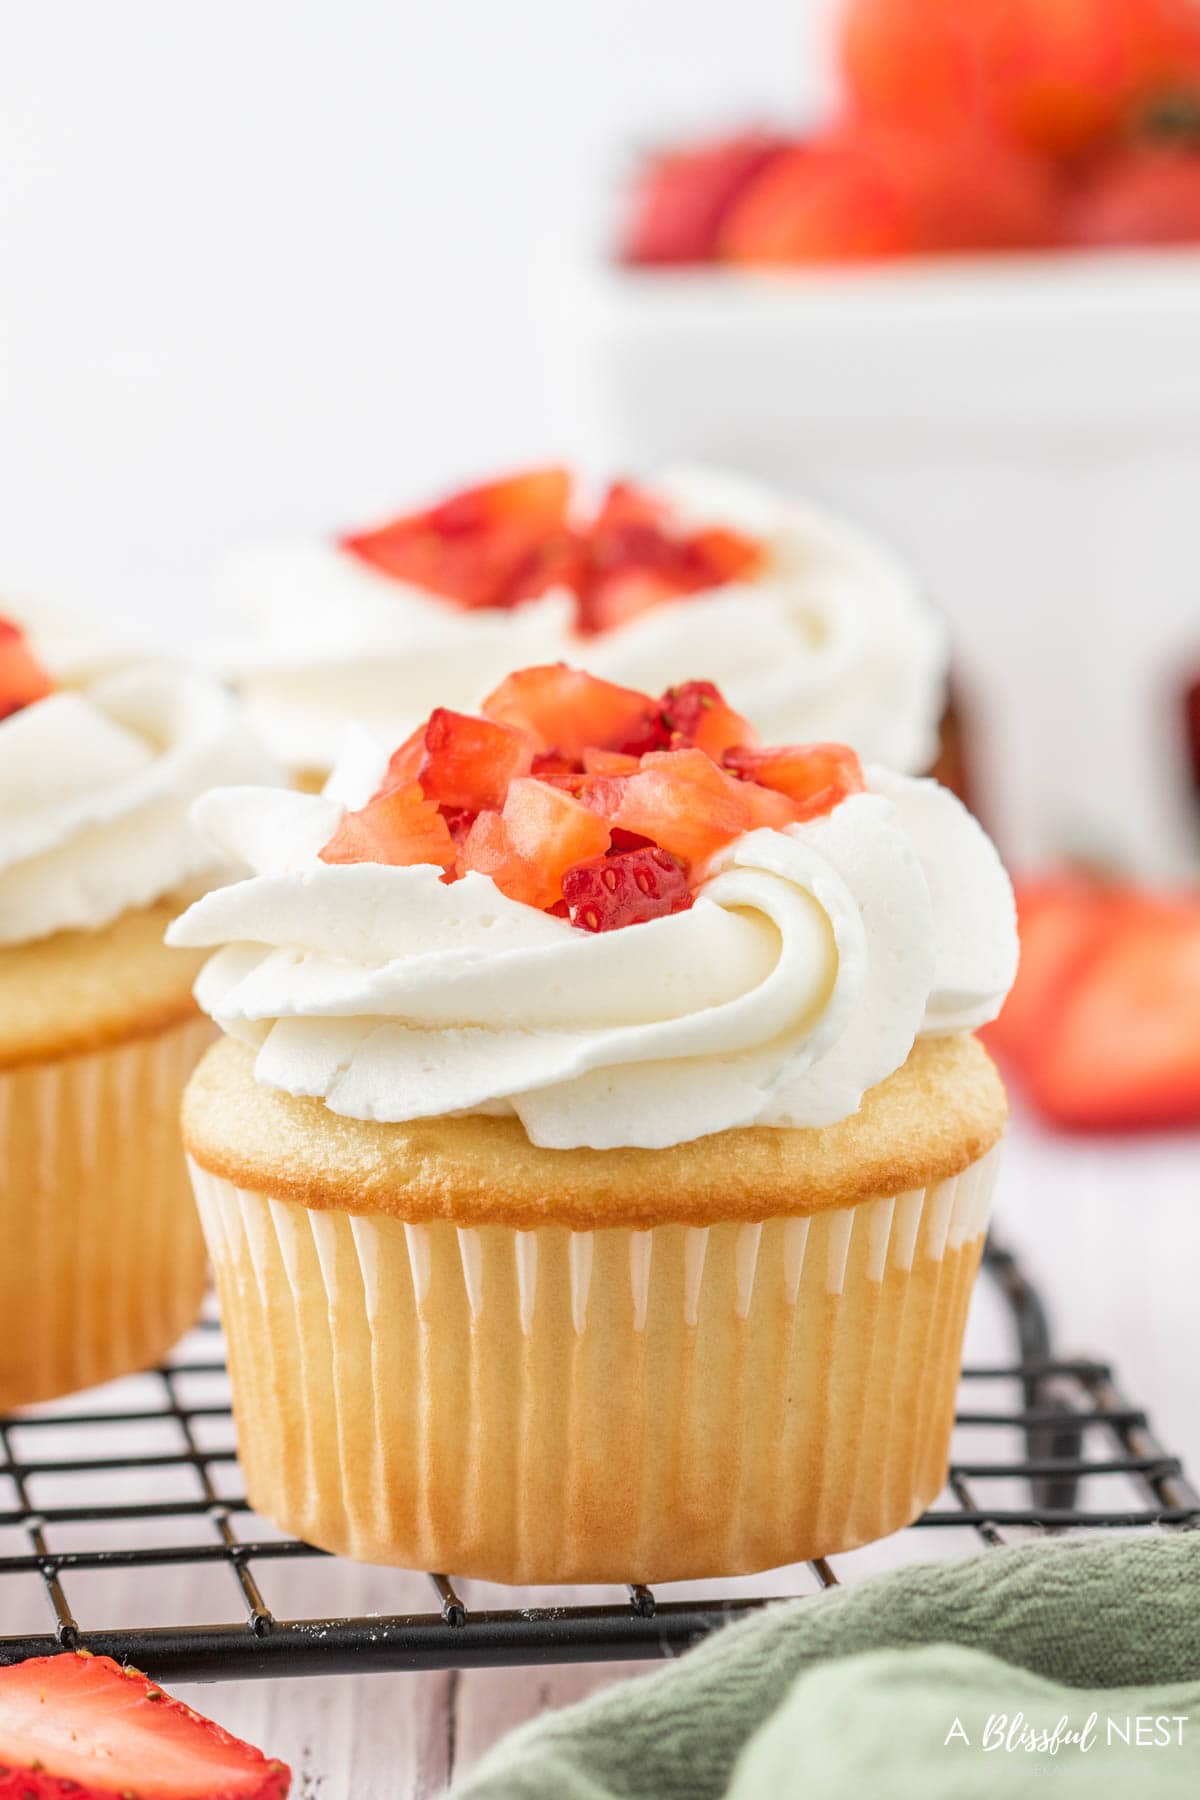 Cupcake with cut strawberries and buttercream frosting.